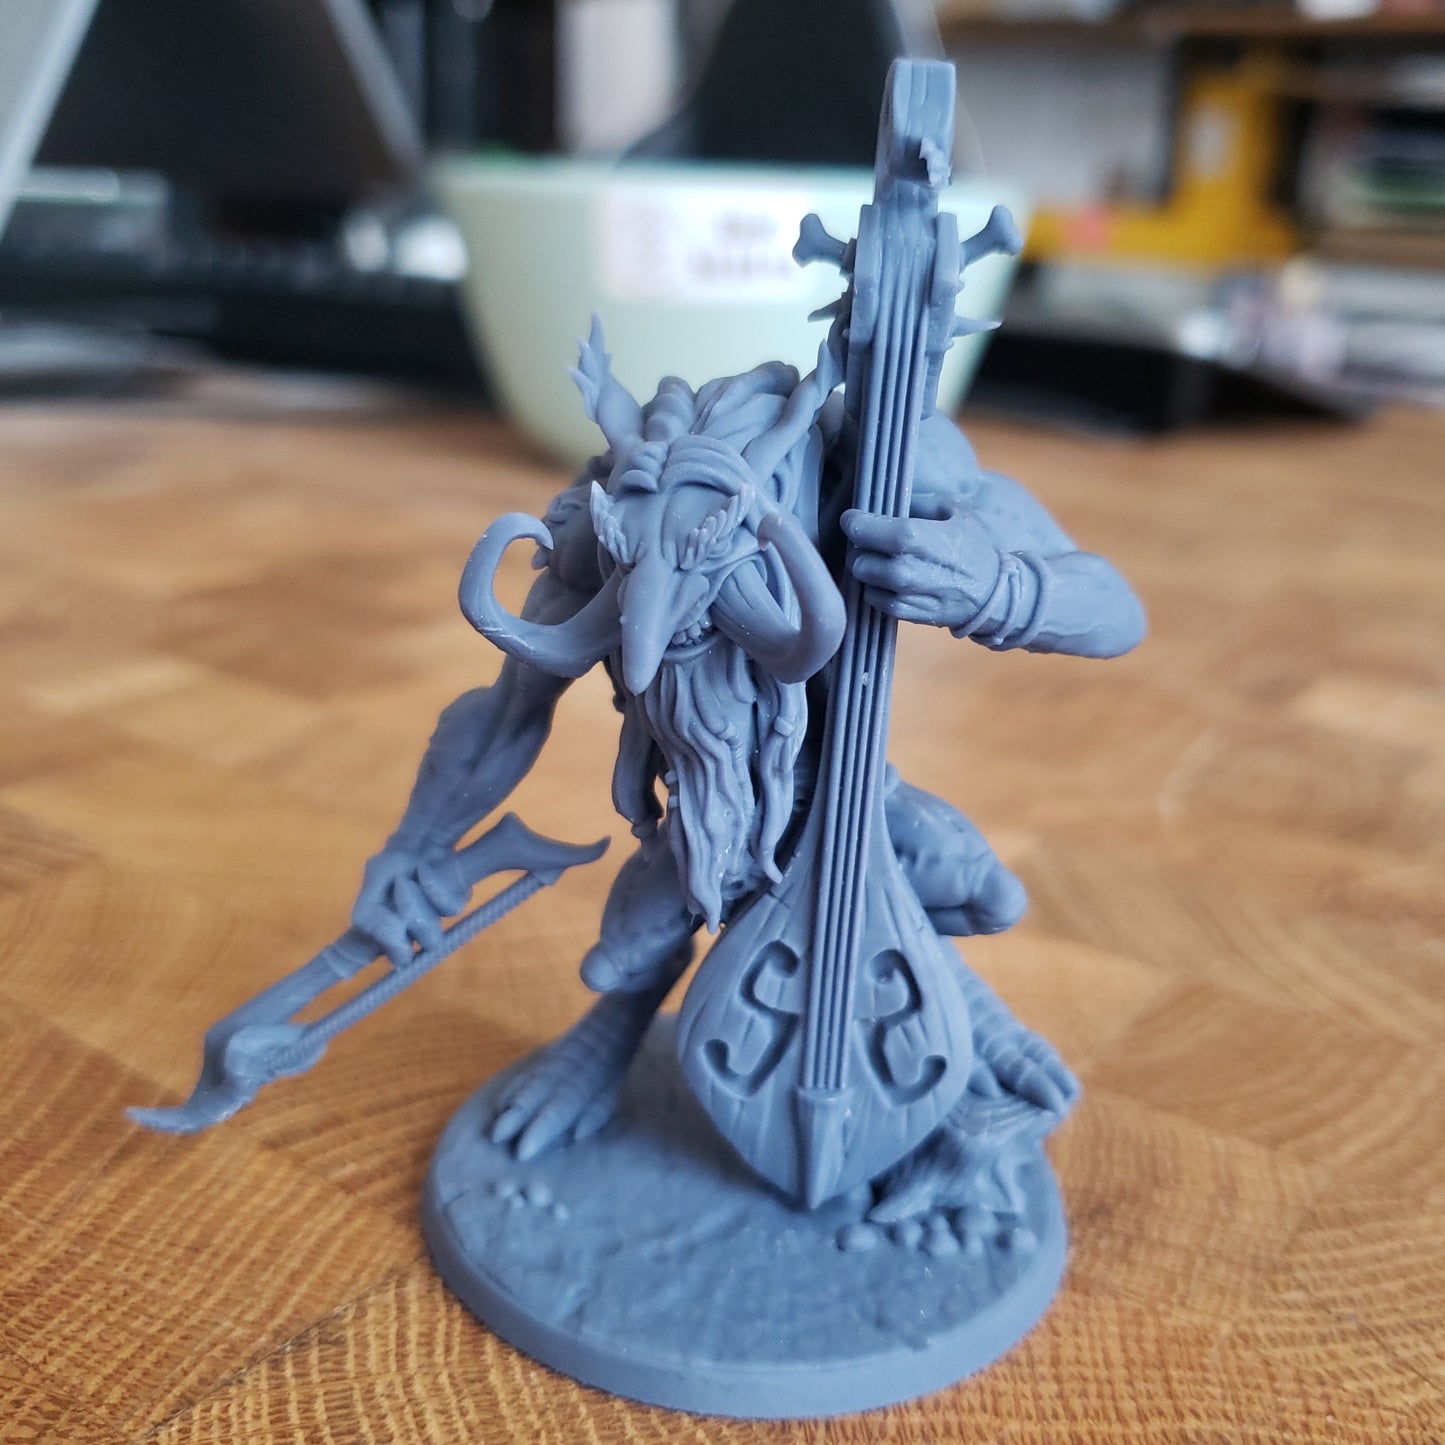 Image shows an example of a 3D printed cellist troll gaming miniature printed in-house at All Systems Go